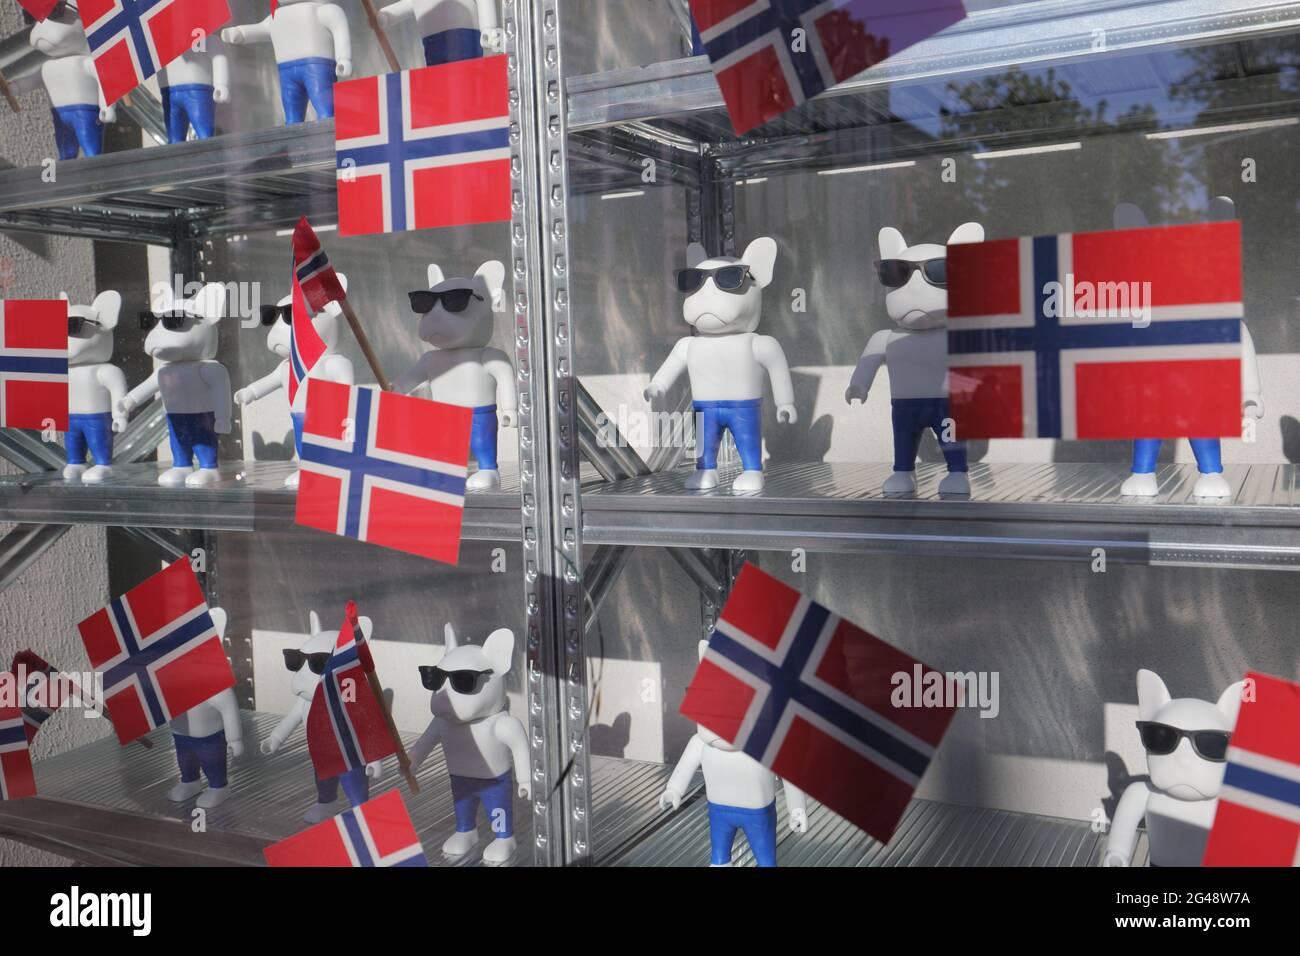 Norwegian Brand Shop High Resolution Stock Photography and Images - Alamy